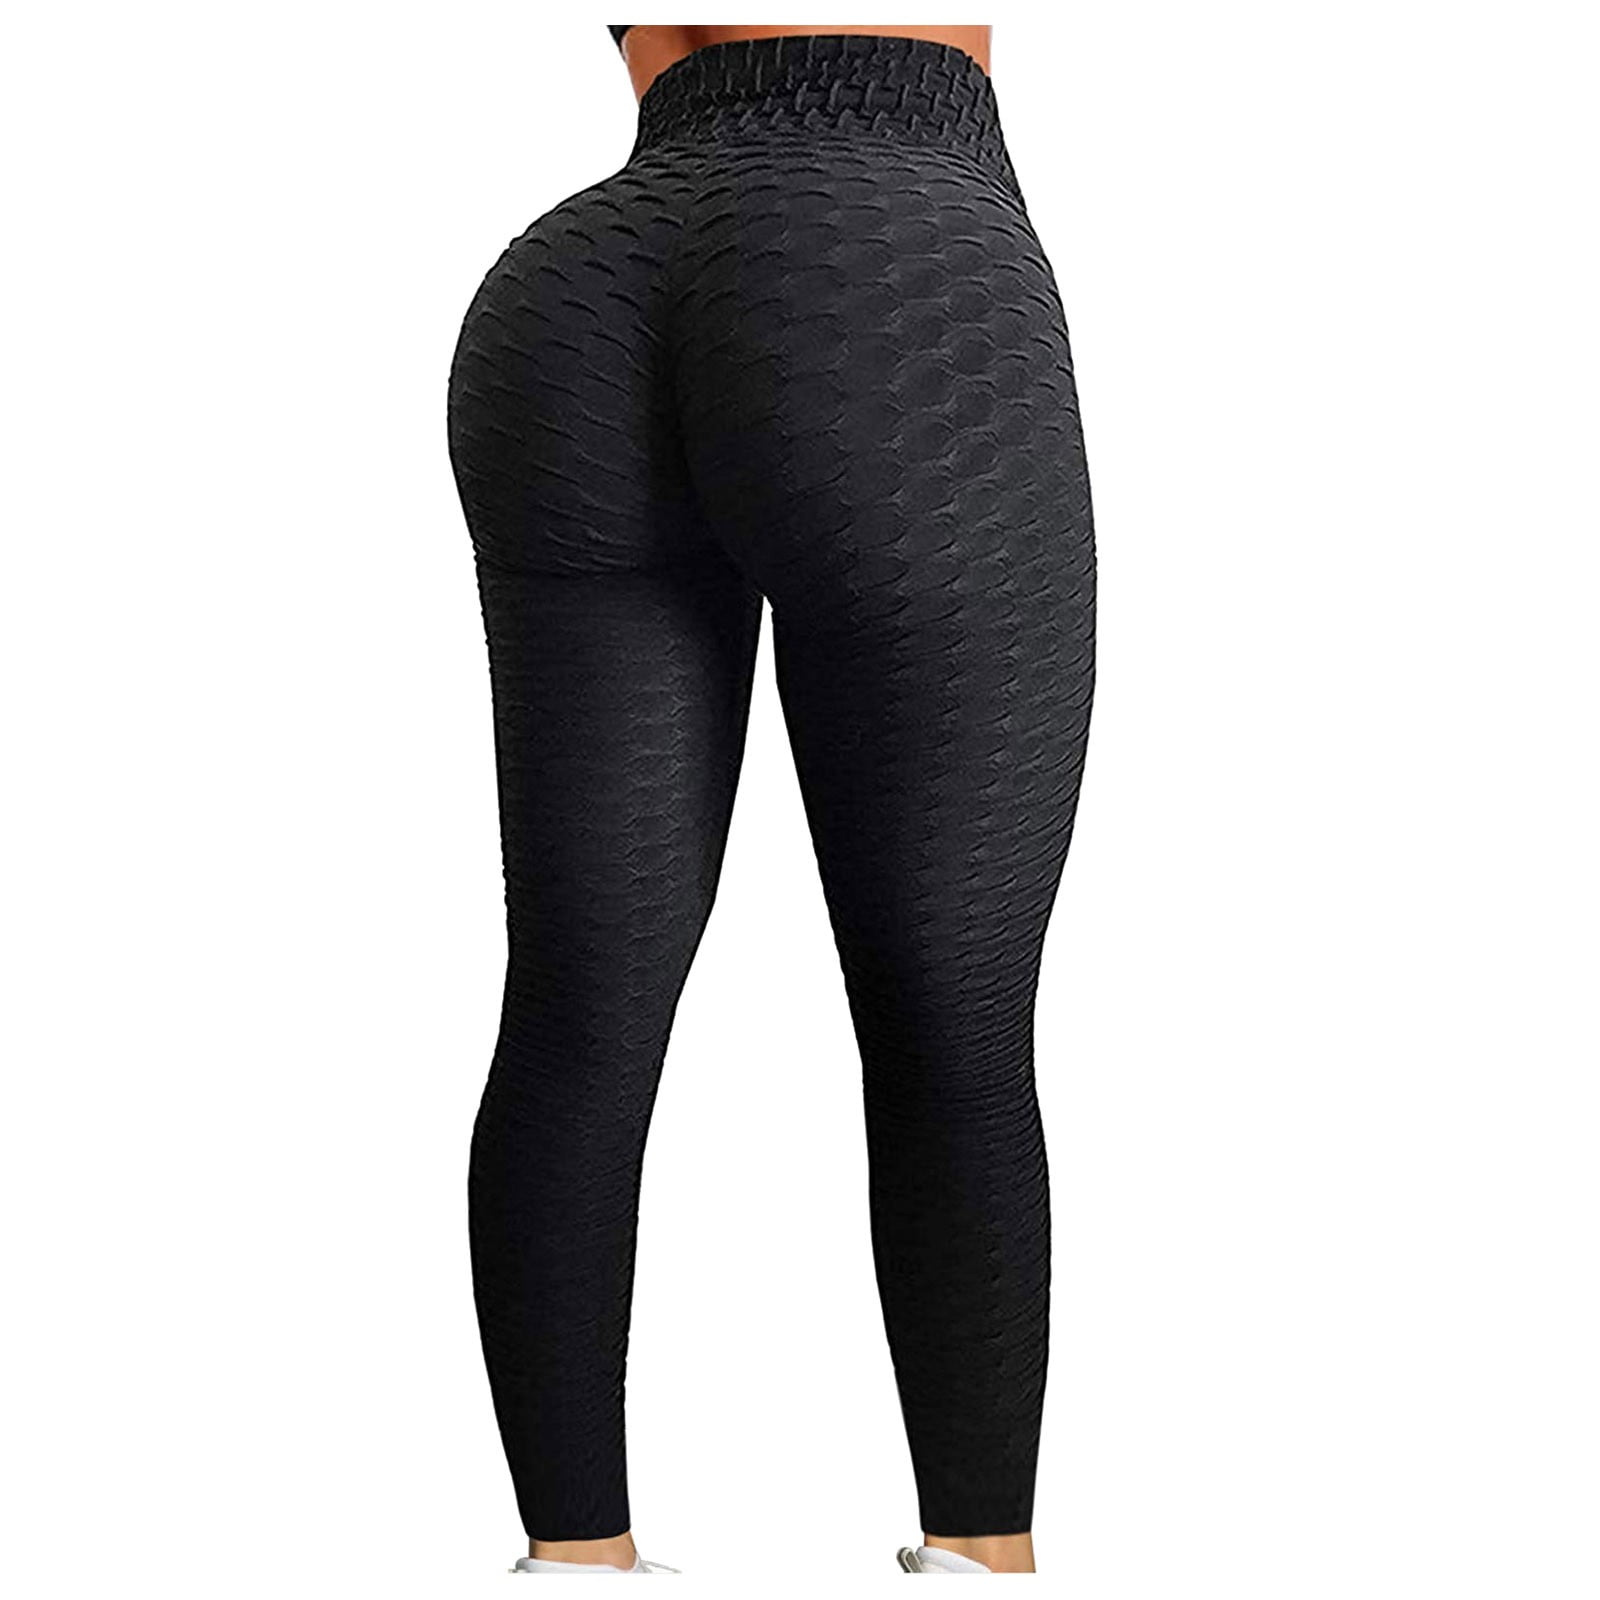  BOGOMORE OFENTI Yoga Leggings with Pockets High Waist Tummy  Control Super Soft Stretchy Workout Yoga Pants 25 Black X-Small :  Clothing, Shoes & Jewelry